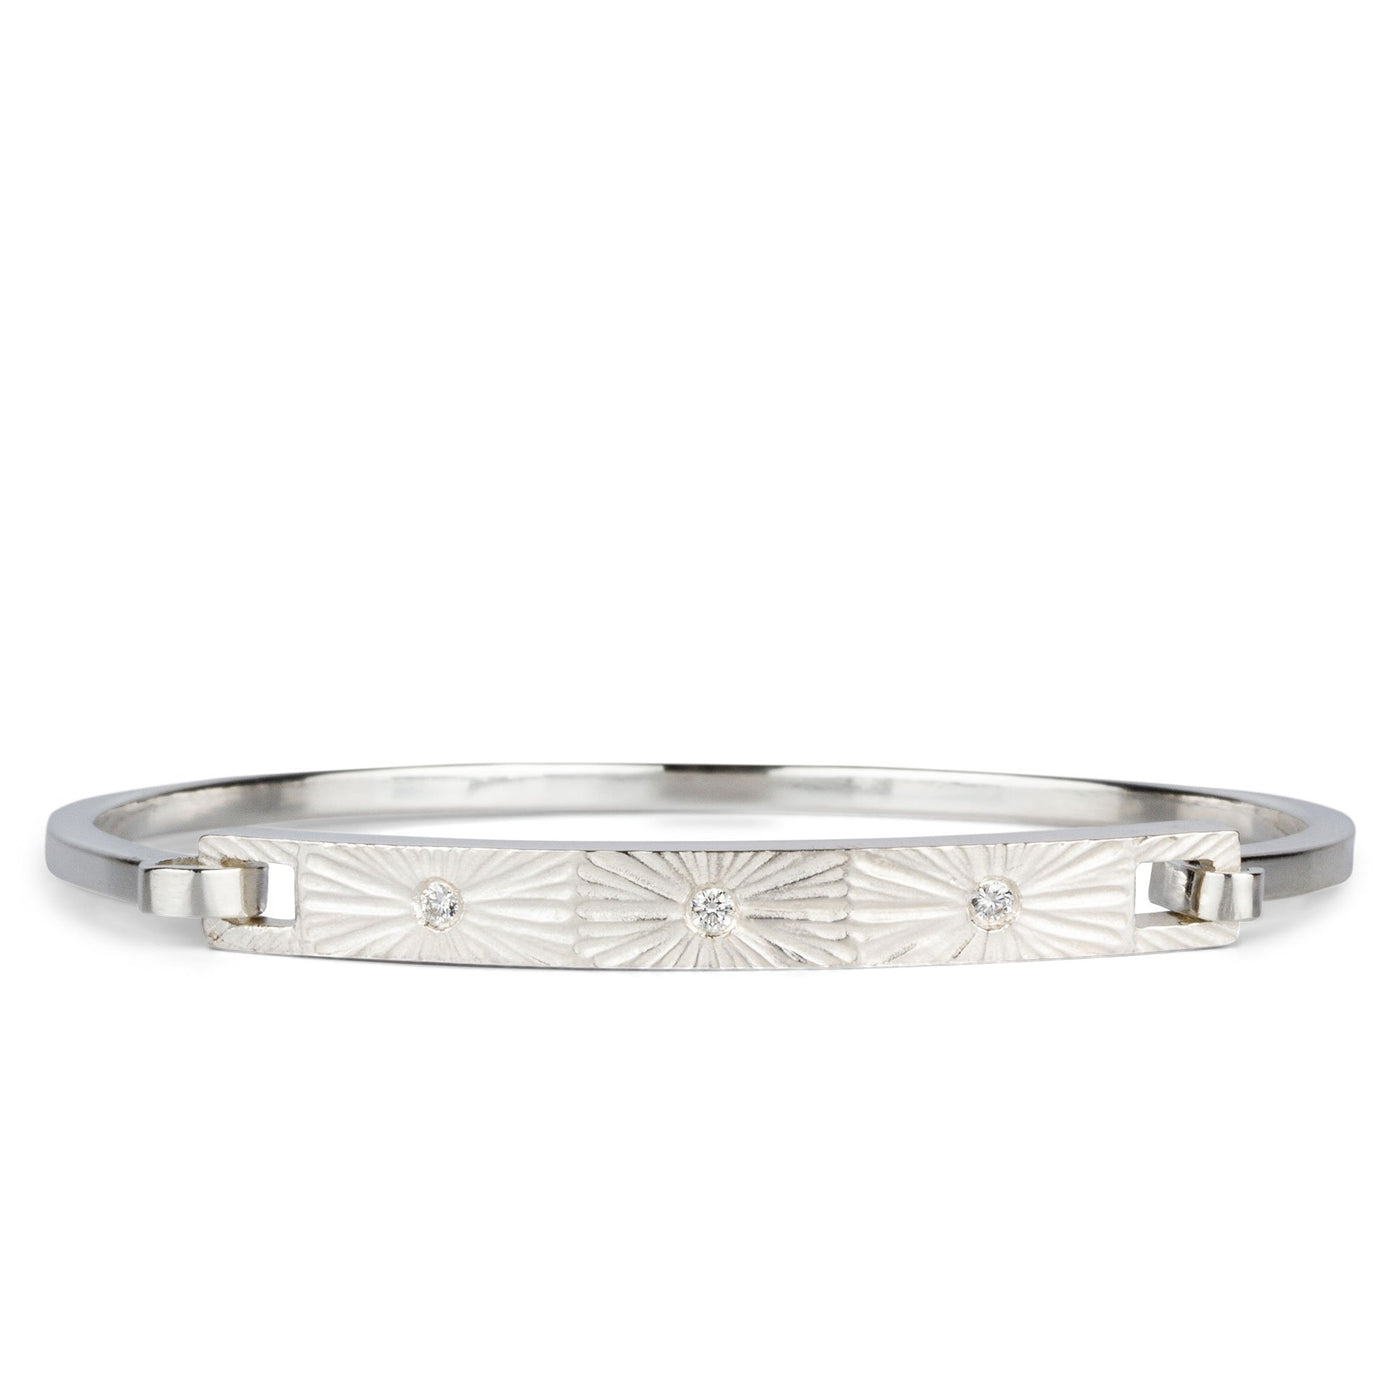 Sterling silver bar bracelet with three diamonds and a carved sunburst around each on a white background by Corey Egan